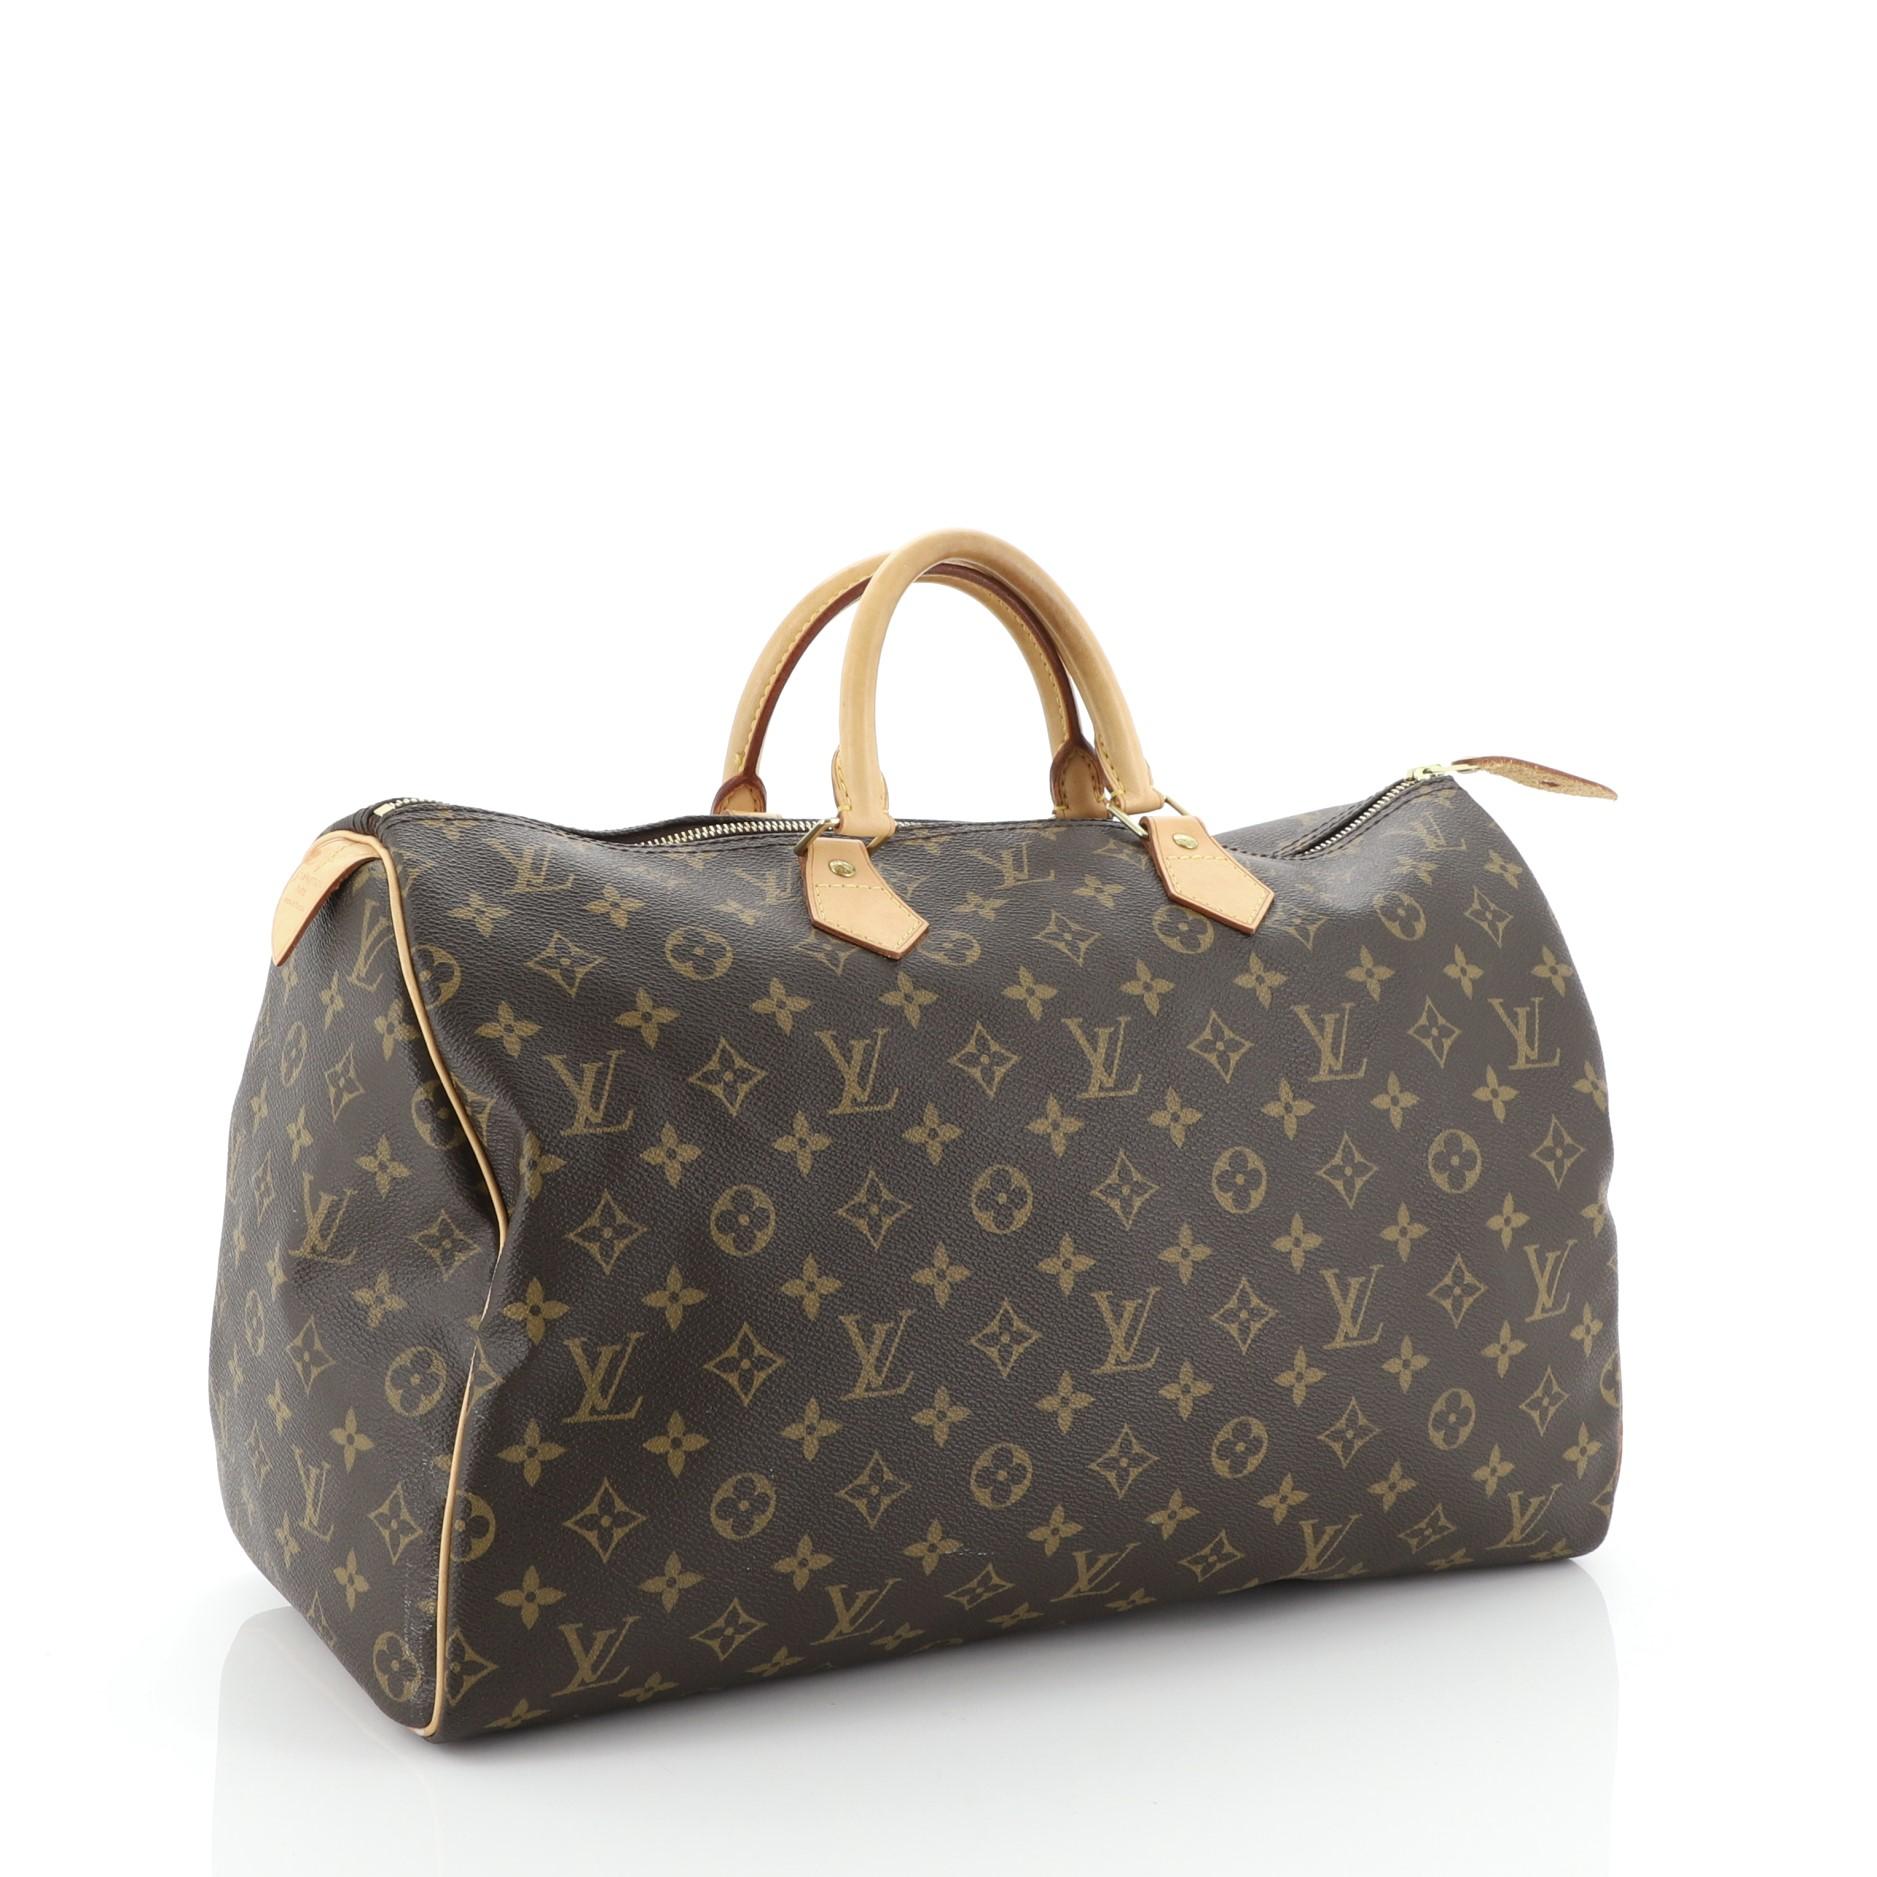 This Louis Vuitton Speedy Handbag Monogram Canvas 40, crafted in brown monogram coated canvas, features dual rolled leather handles, vachetta leather trim, and gold-tone hardware. Its zip closure opens to a brown fabric interior with zip pocket.